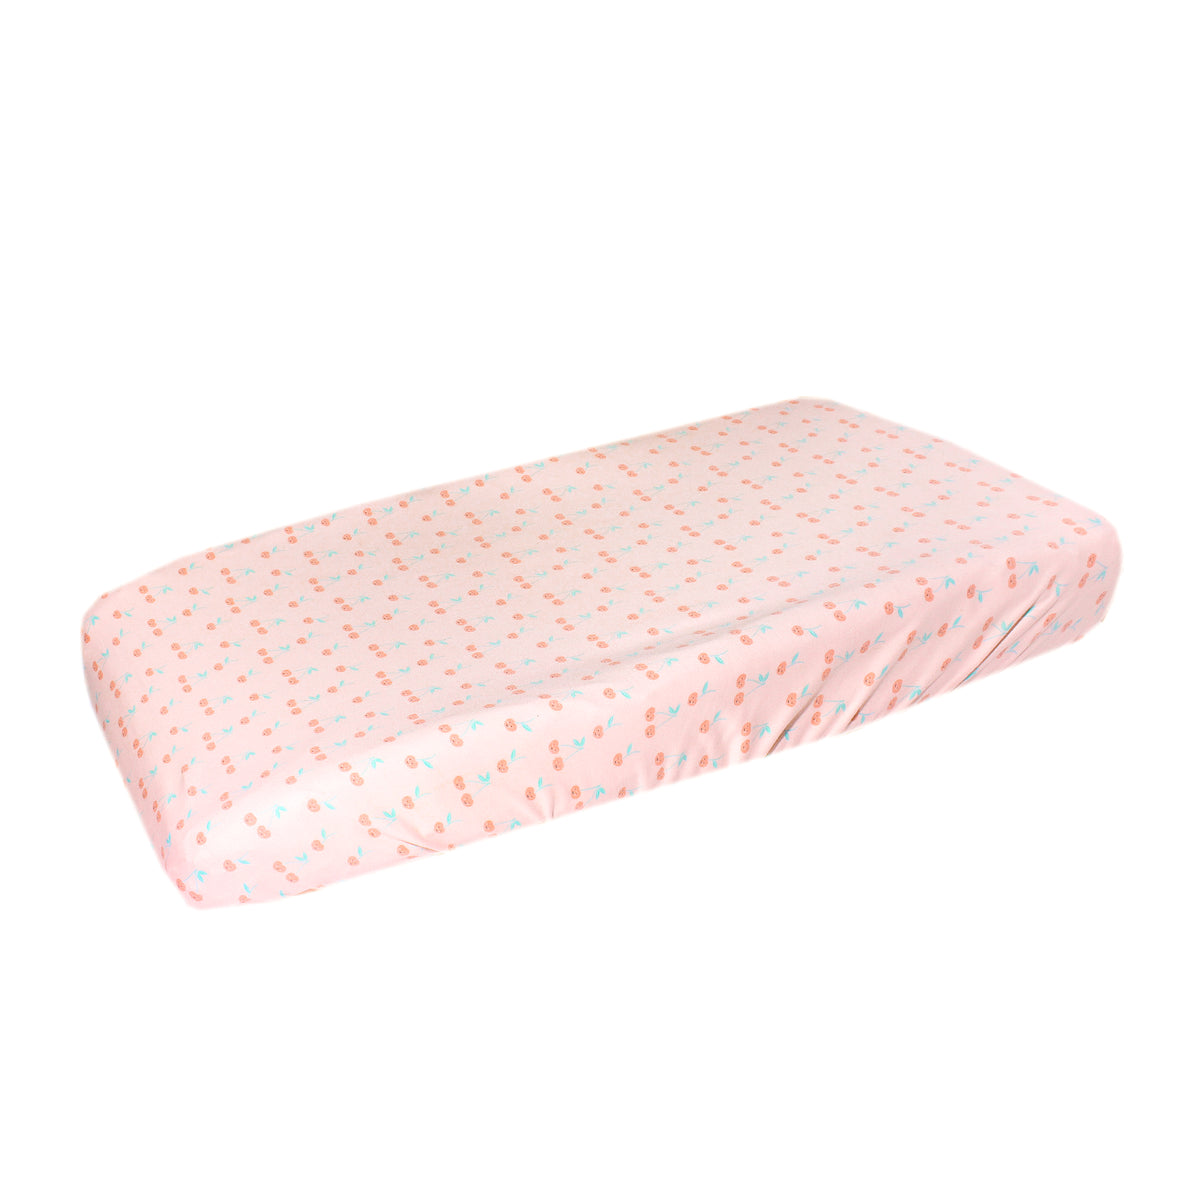 Premium Knit Diaper Changing Pad Cover - Cheery